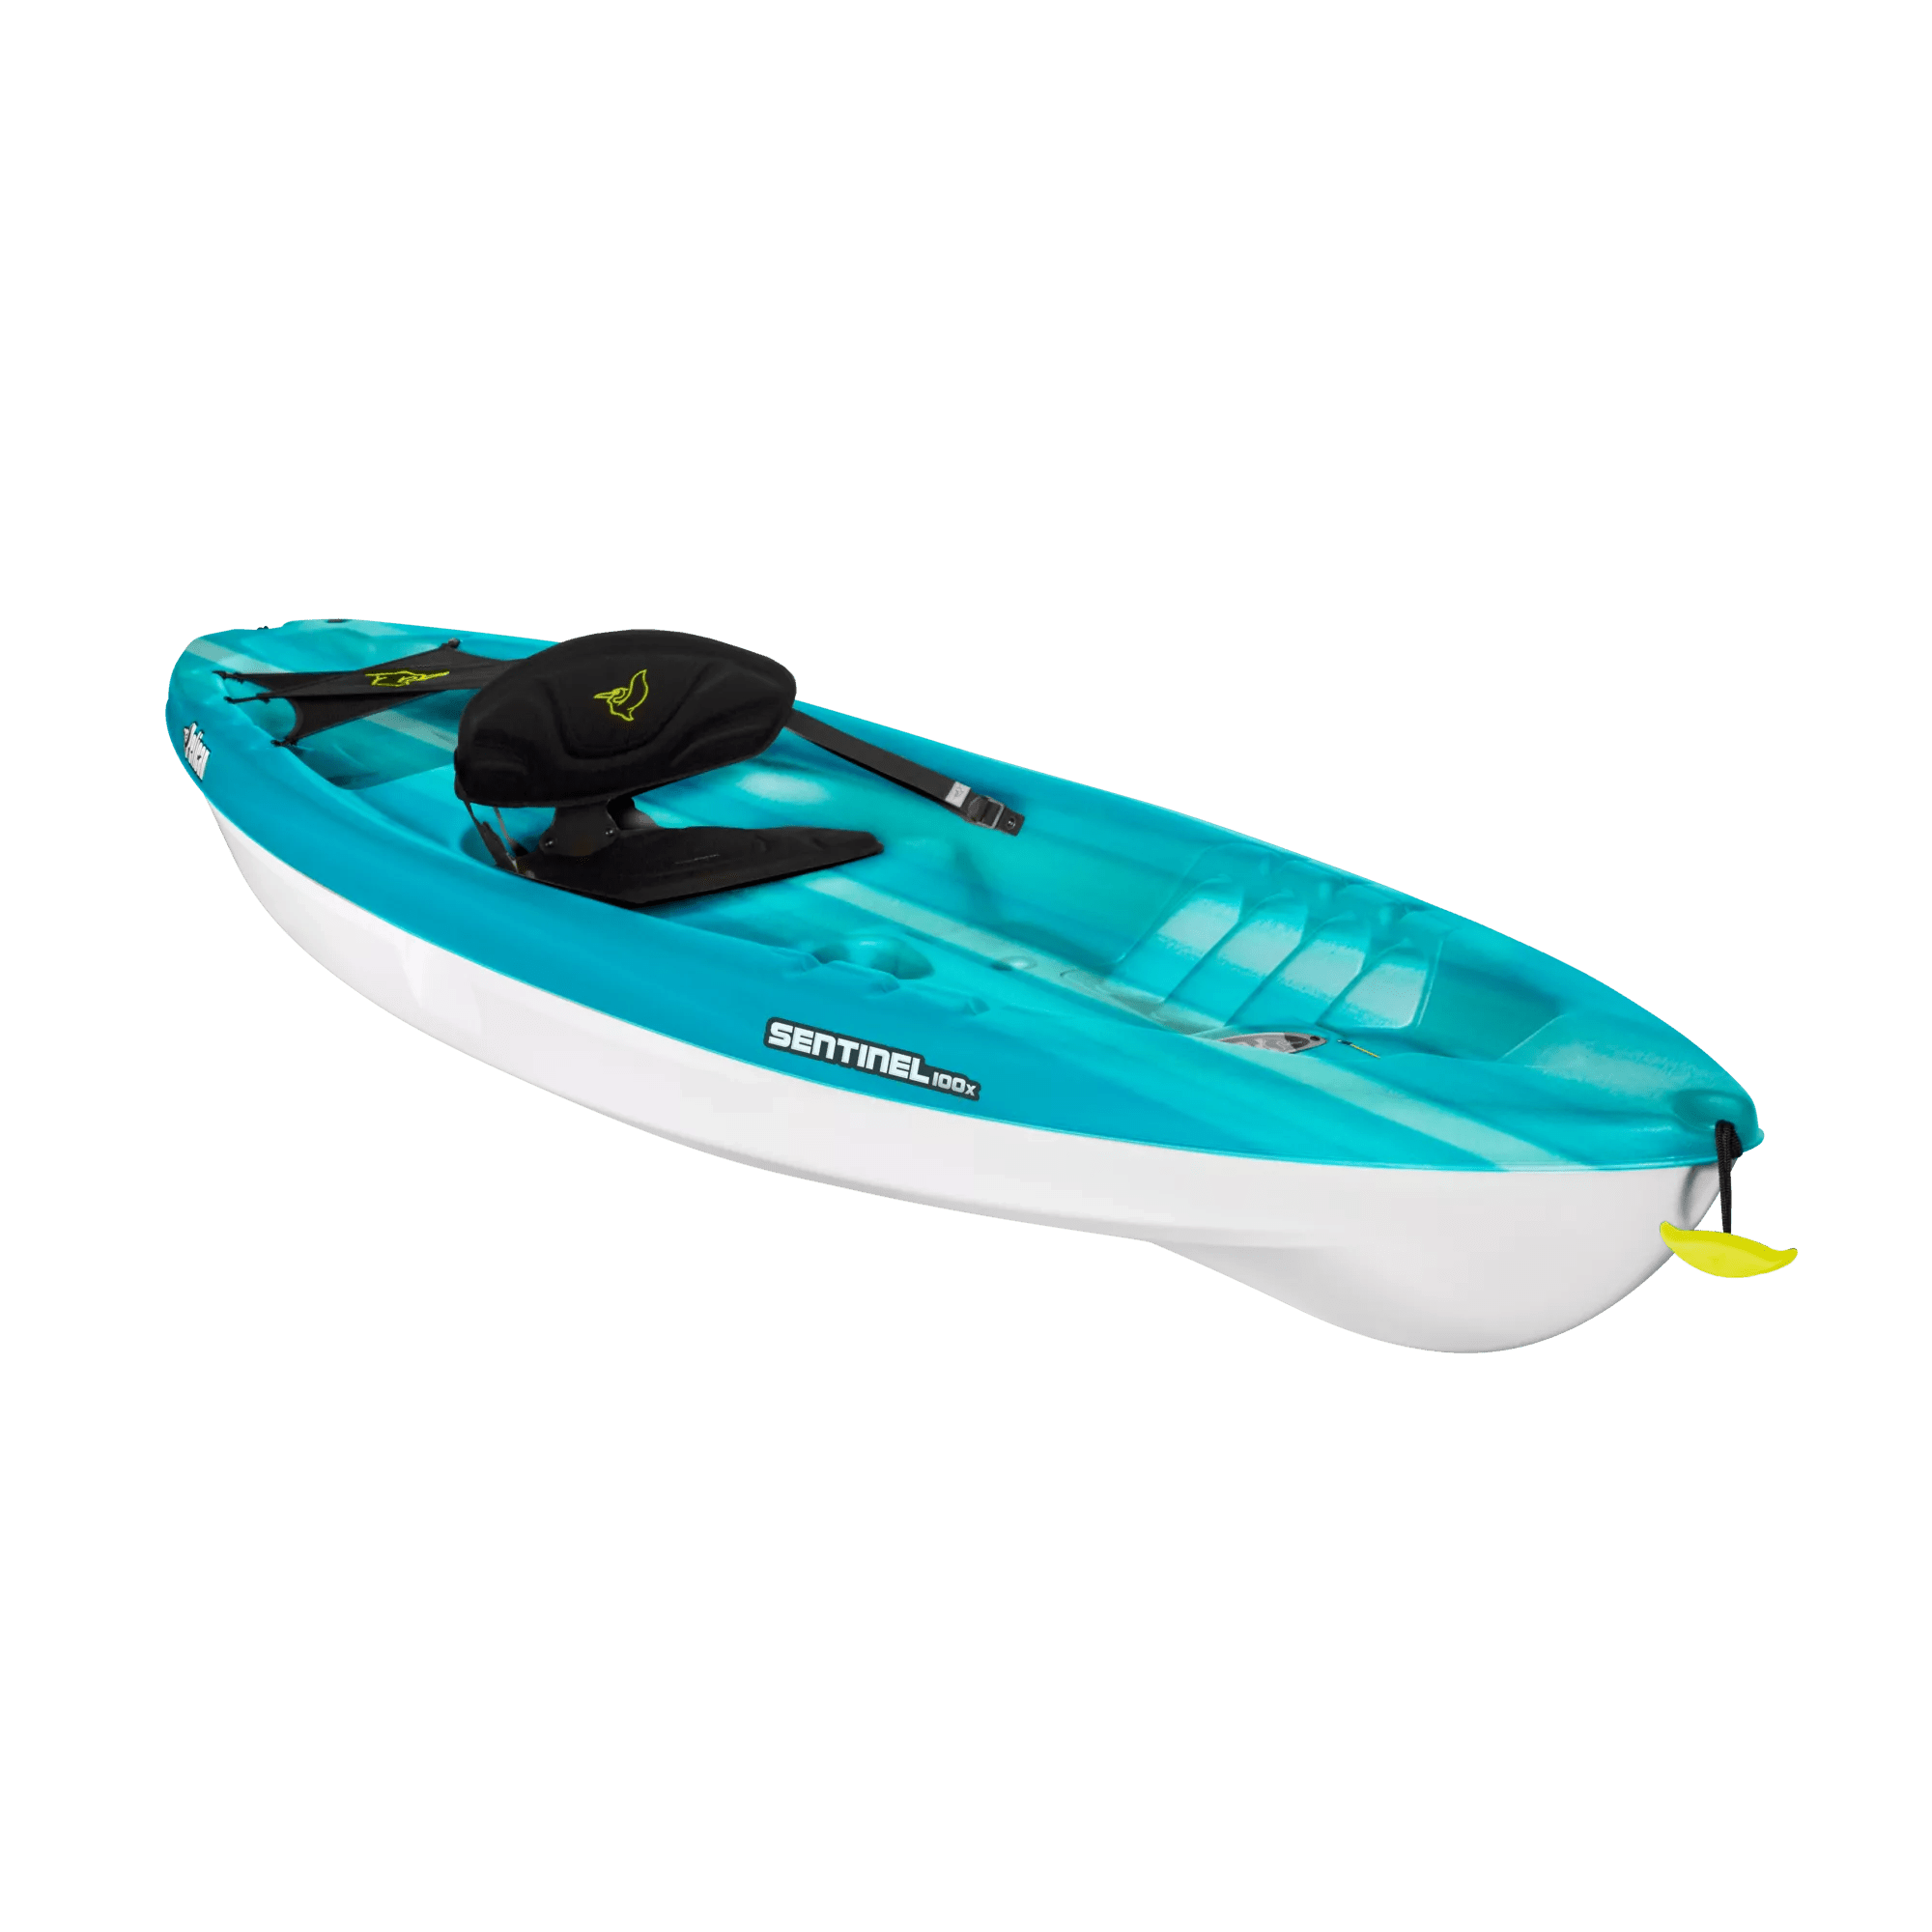 PELICAN - Sentinel 100X Recreational Kayak - Discontinued color/model - Blue - KVF10P101-00 - ISO